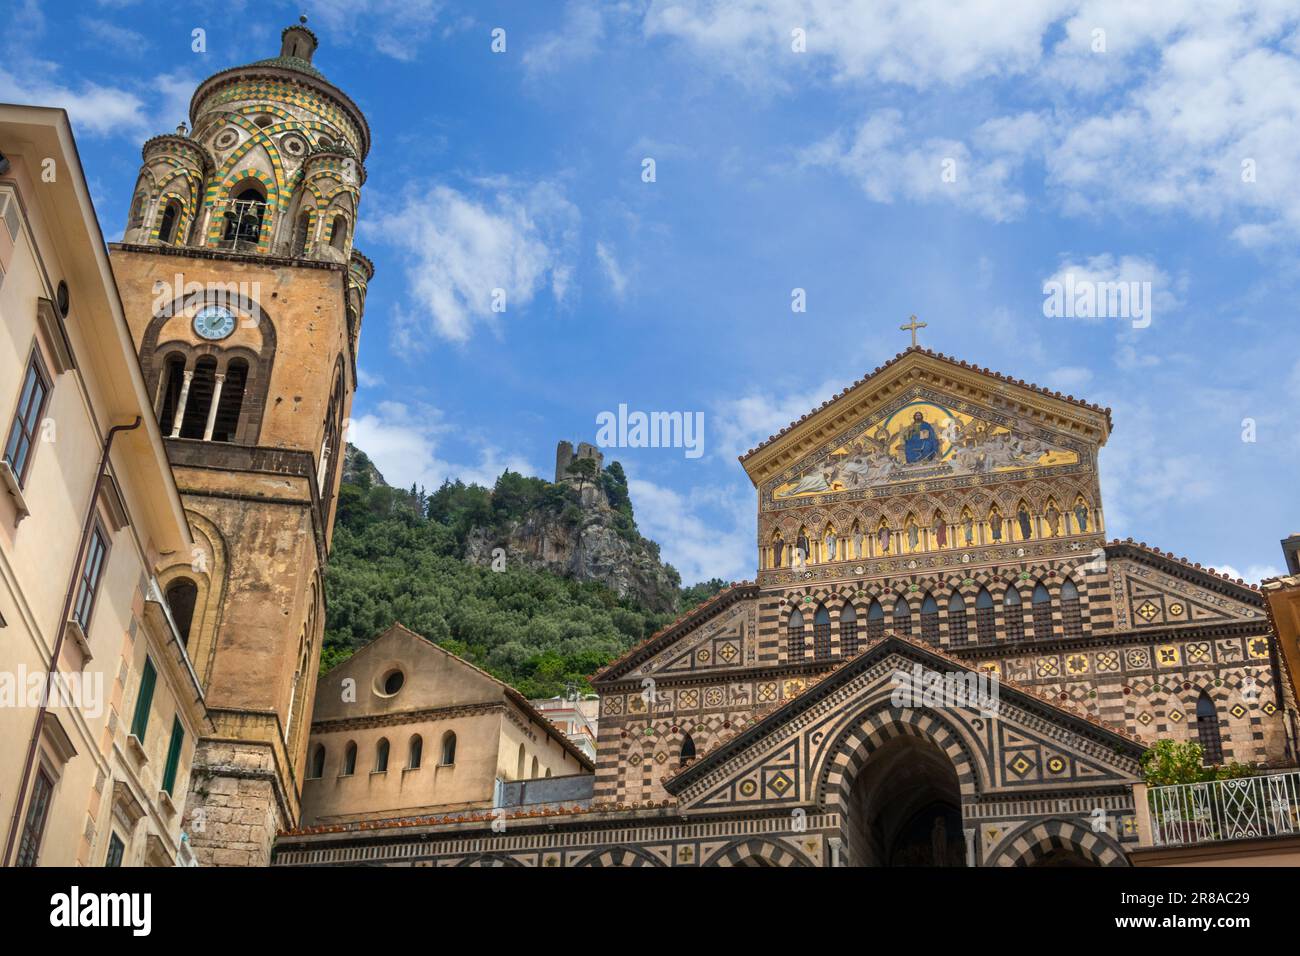 View of the Cathedral of Saint Andrea in Amalfi Town, and the steps leading to it from the Piazza del Duomo, Italy Stock Photo